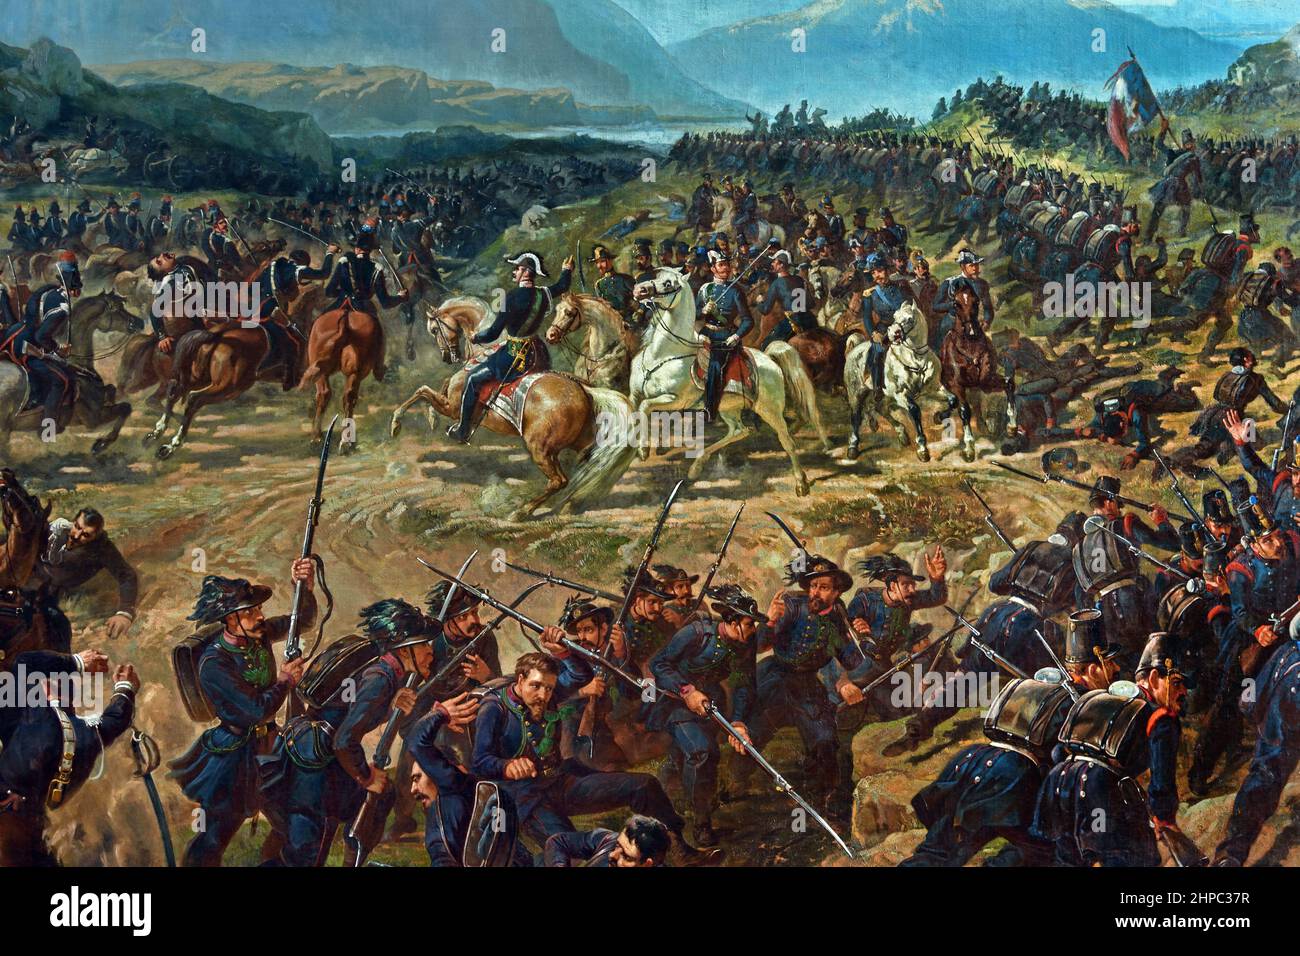 Charge of Pastrengo - First War of Independence, Charles Albert of Savoy at Pastrengo on April 30 1848, by painter Vincenzo Giacomelli, 1855  The first War of Independence , fought by the Kingdom of Sardinia and by Italian volunteers against the Austrian Empire and other conservative nations from 23 March 1848 to 22 August 1849. Stock Photo